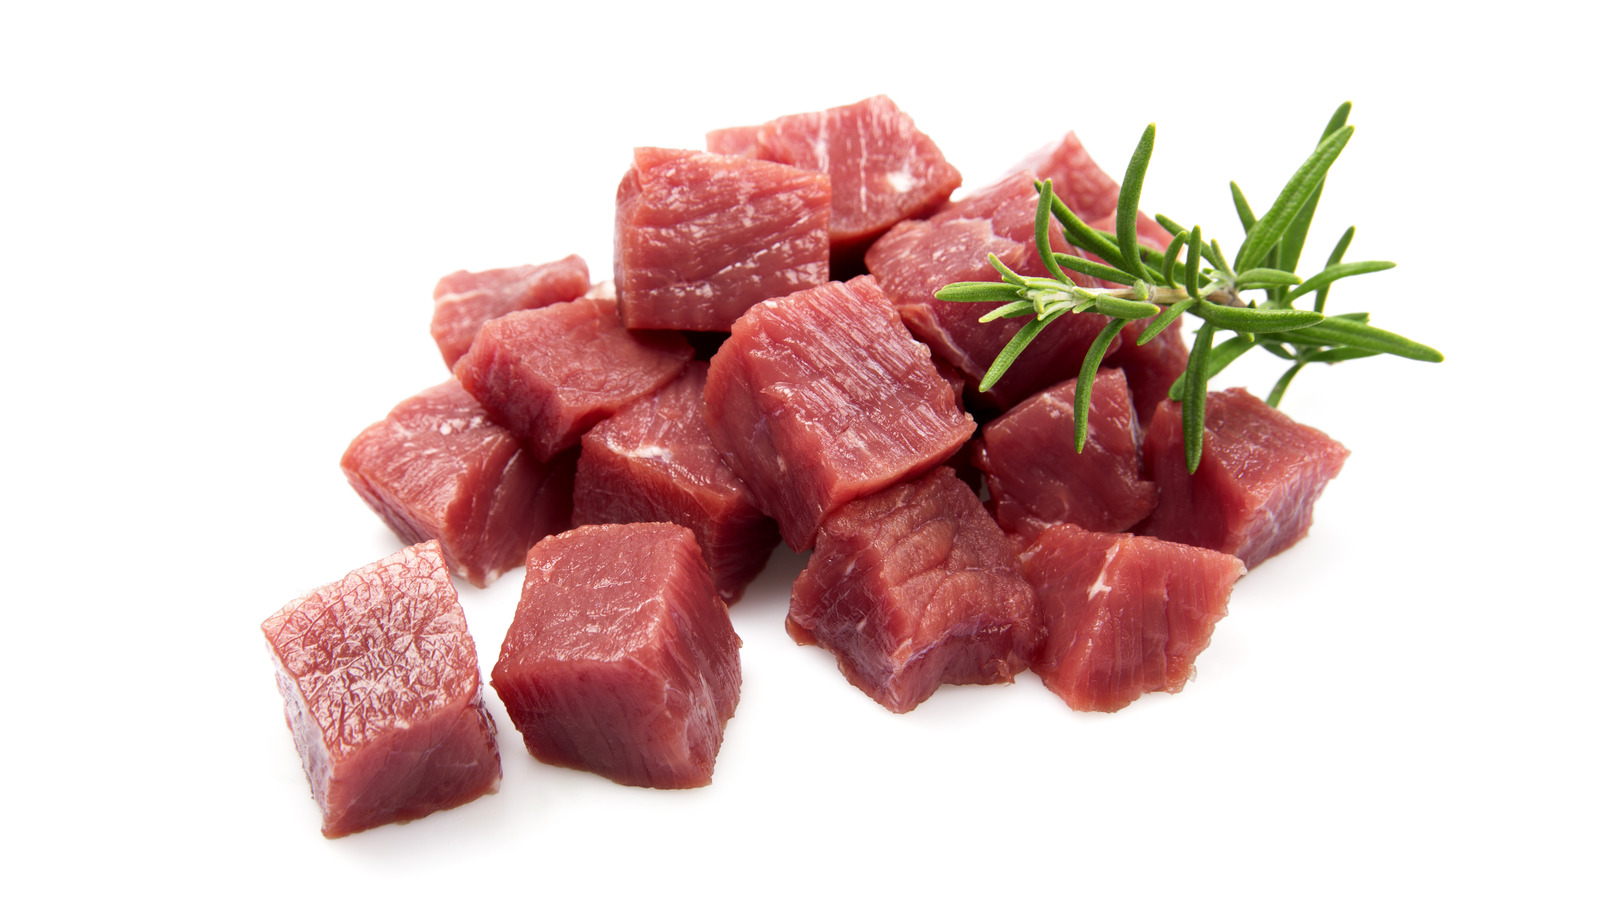 Here's What You Need To Do If You Eat Raw Meat By Mistake